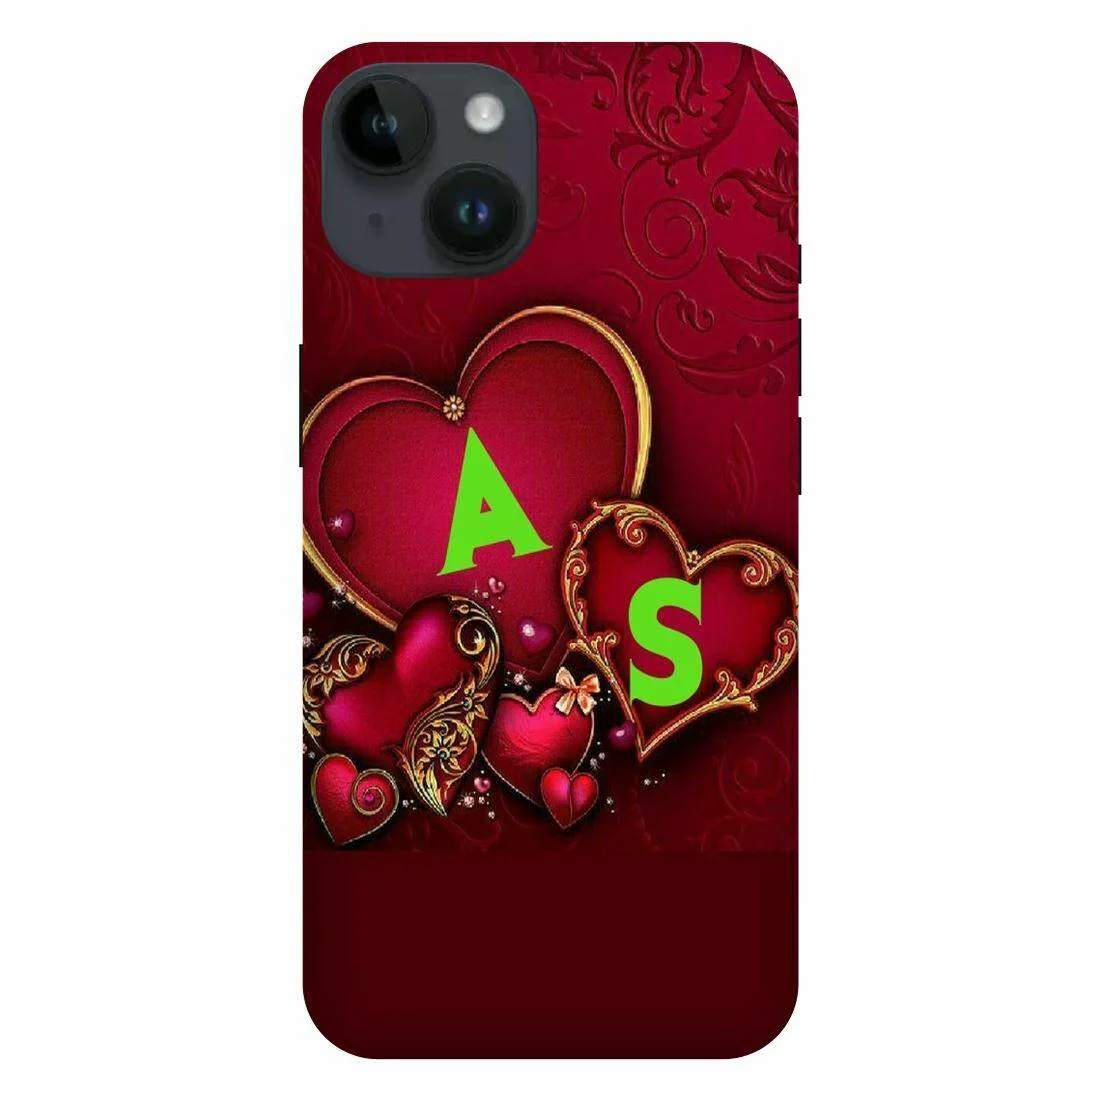 Voleano back cover for Apple I Phone 14 5G, Alove, S, letter, A, S ...